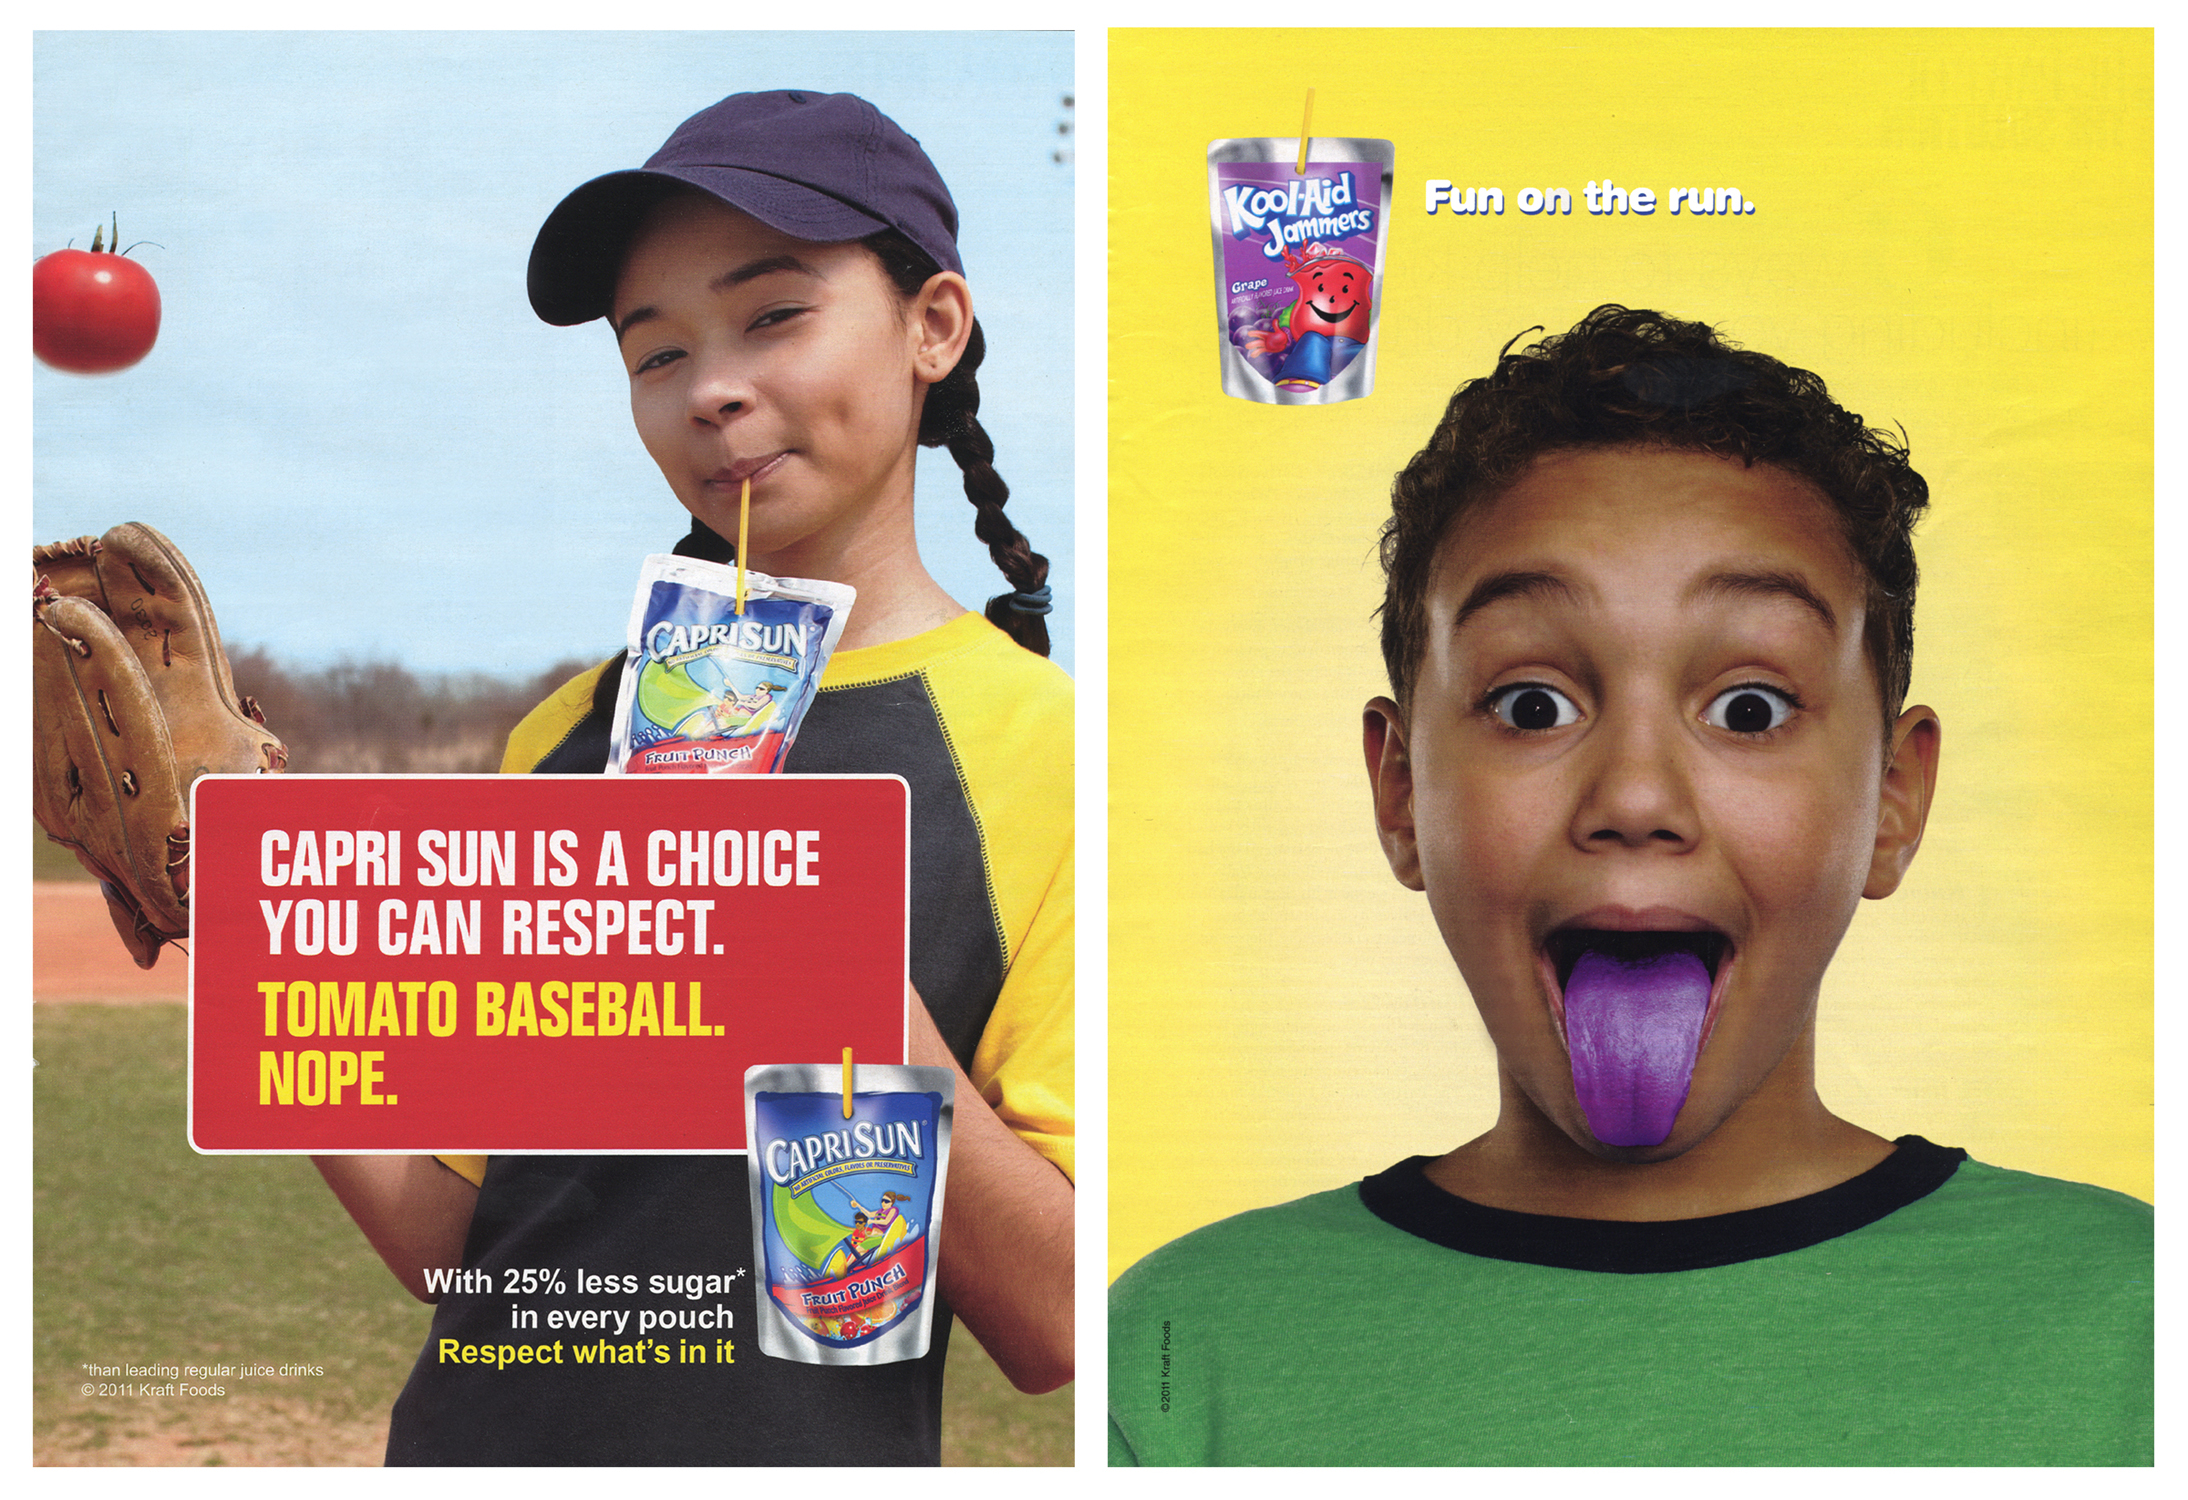 print ads examples for kids